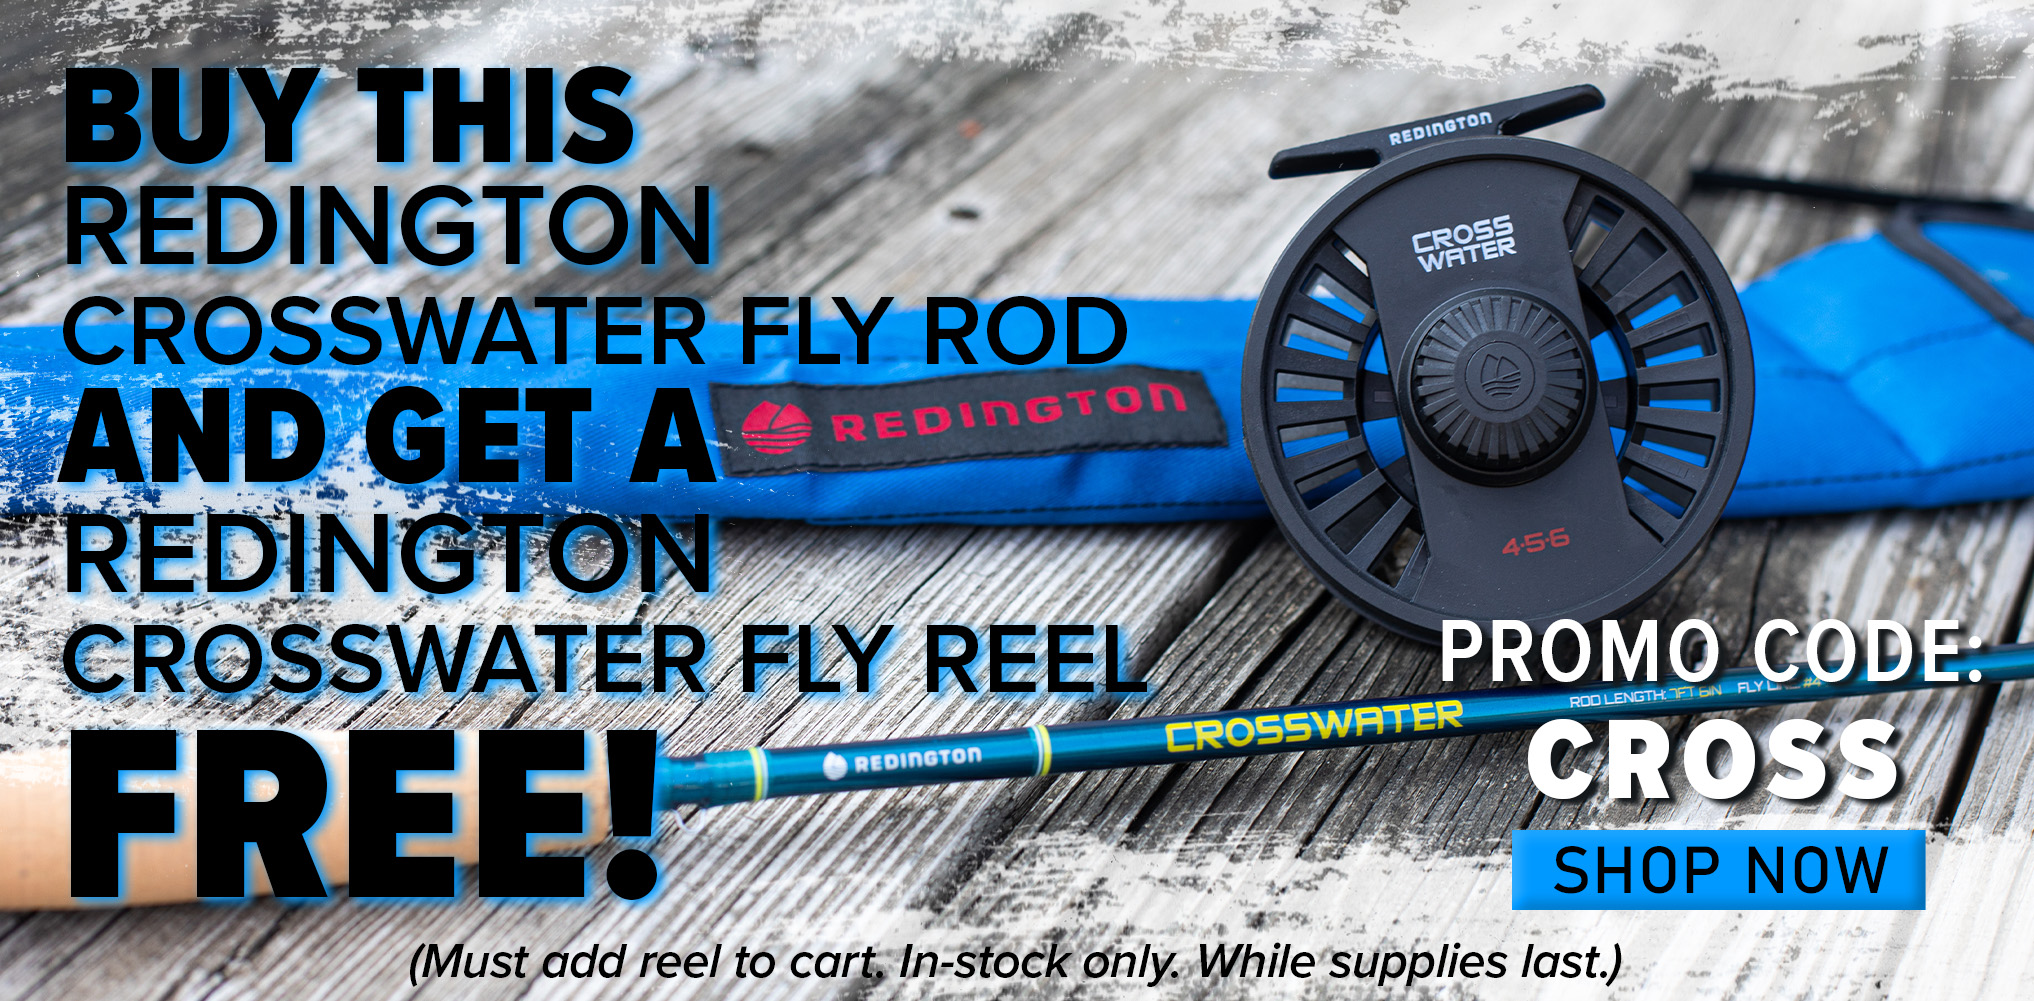 Buy This Redington Crosswater Fly Rod And Get A Redington Crosswater Fly Reel Free! Promo Code: CROSS Shop Now (Must add reel to cart. In-stock only. While supplies last.)